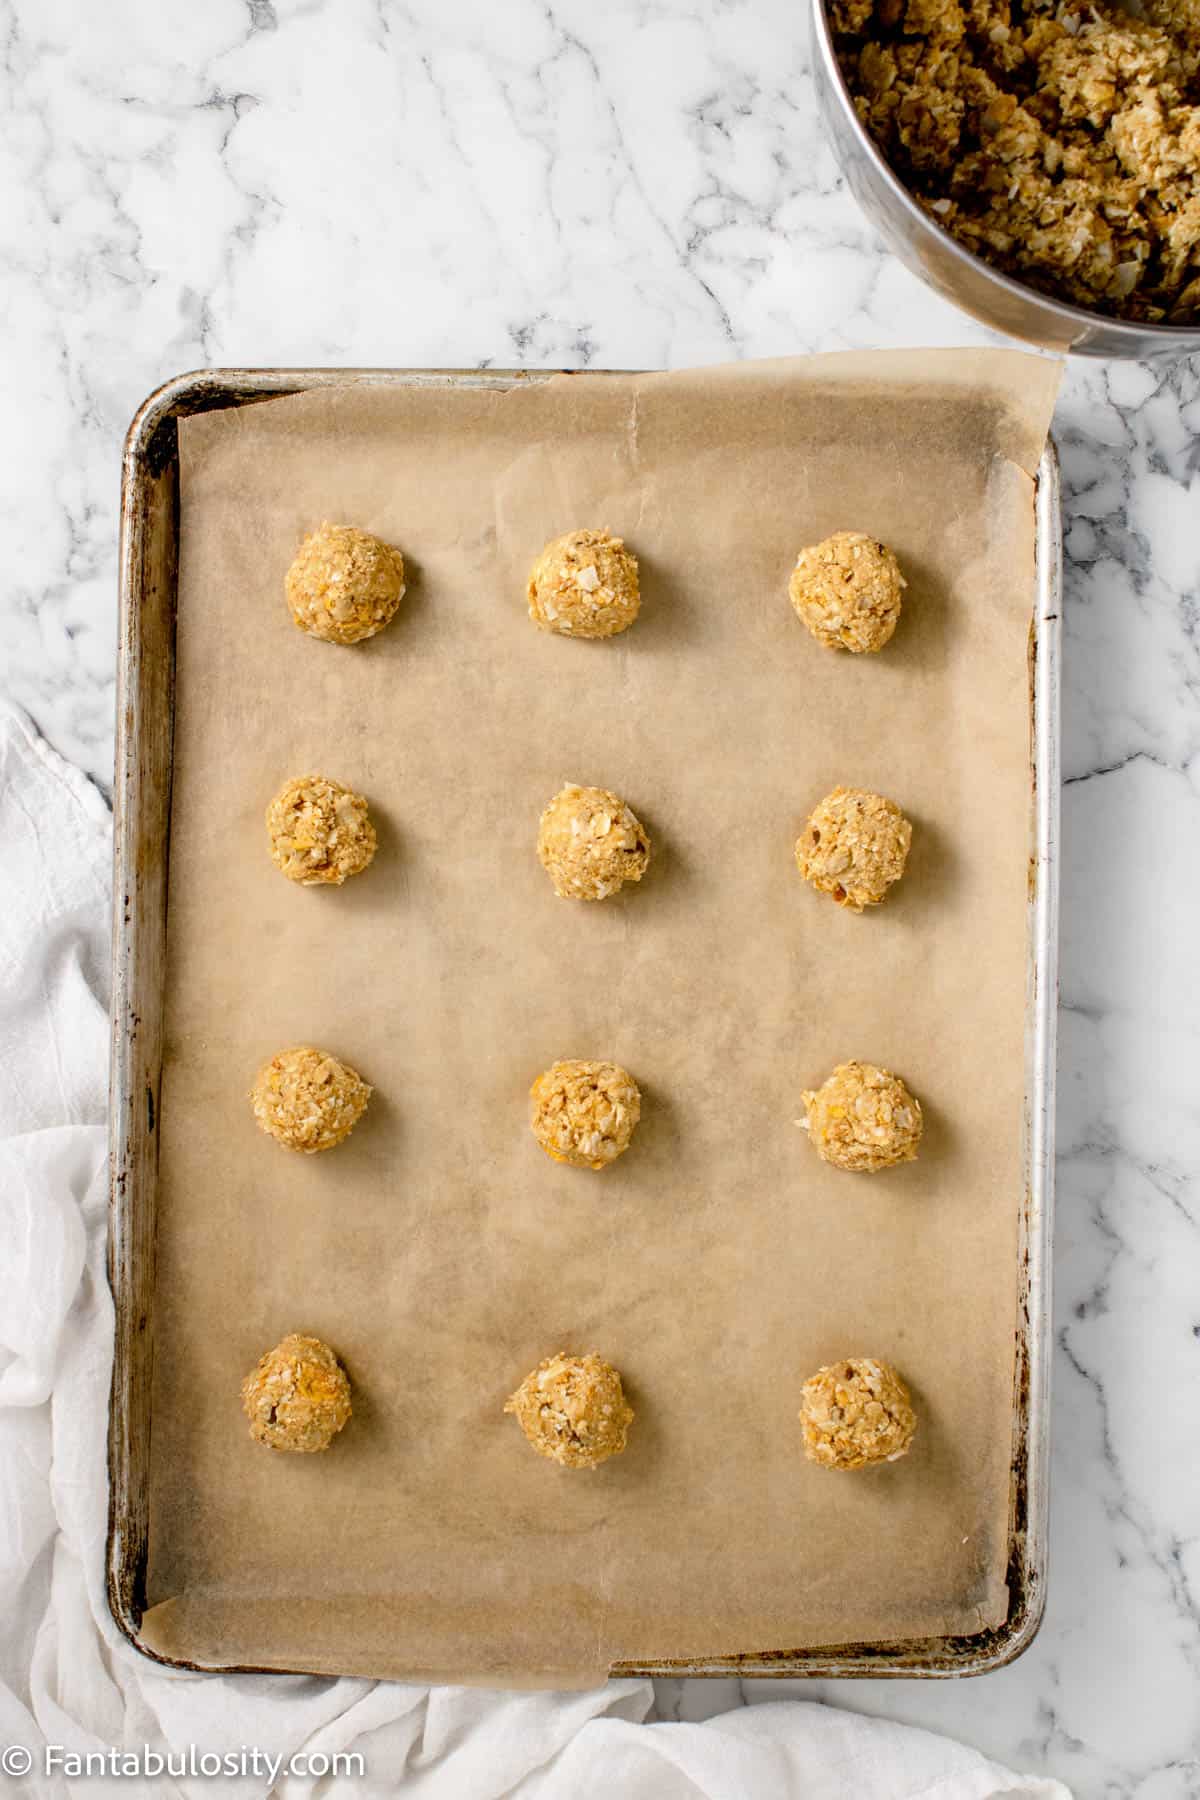 Balls of cookie dough on parchment lined baking sheet.